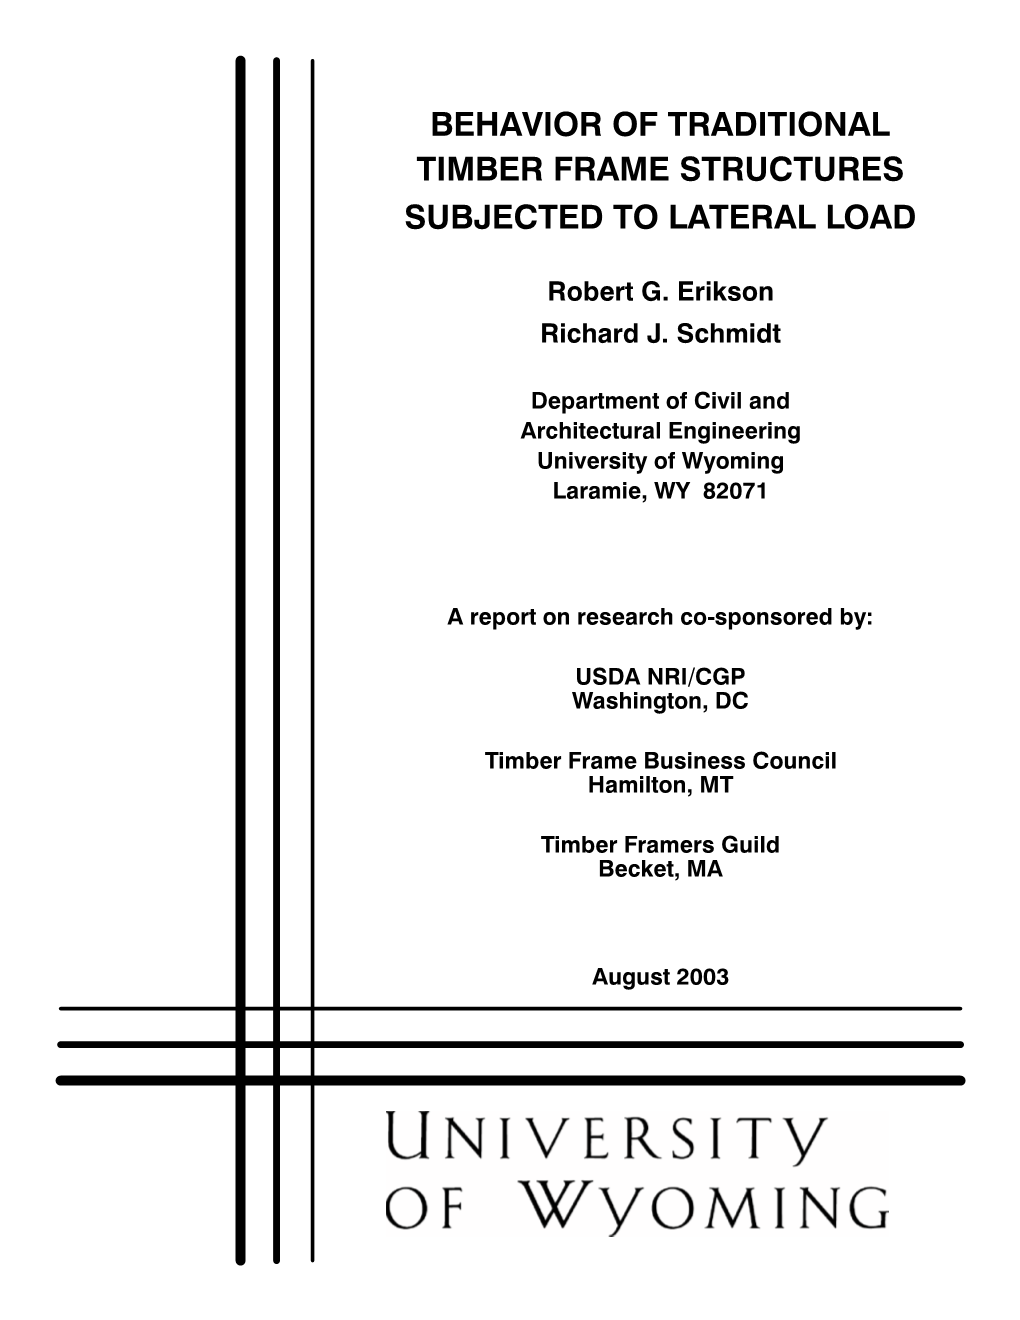 Behavior of Traditional Timber Frame Structures Subjected to Lateral Load